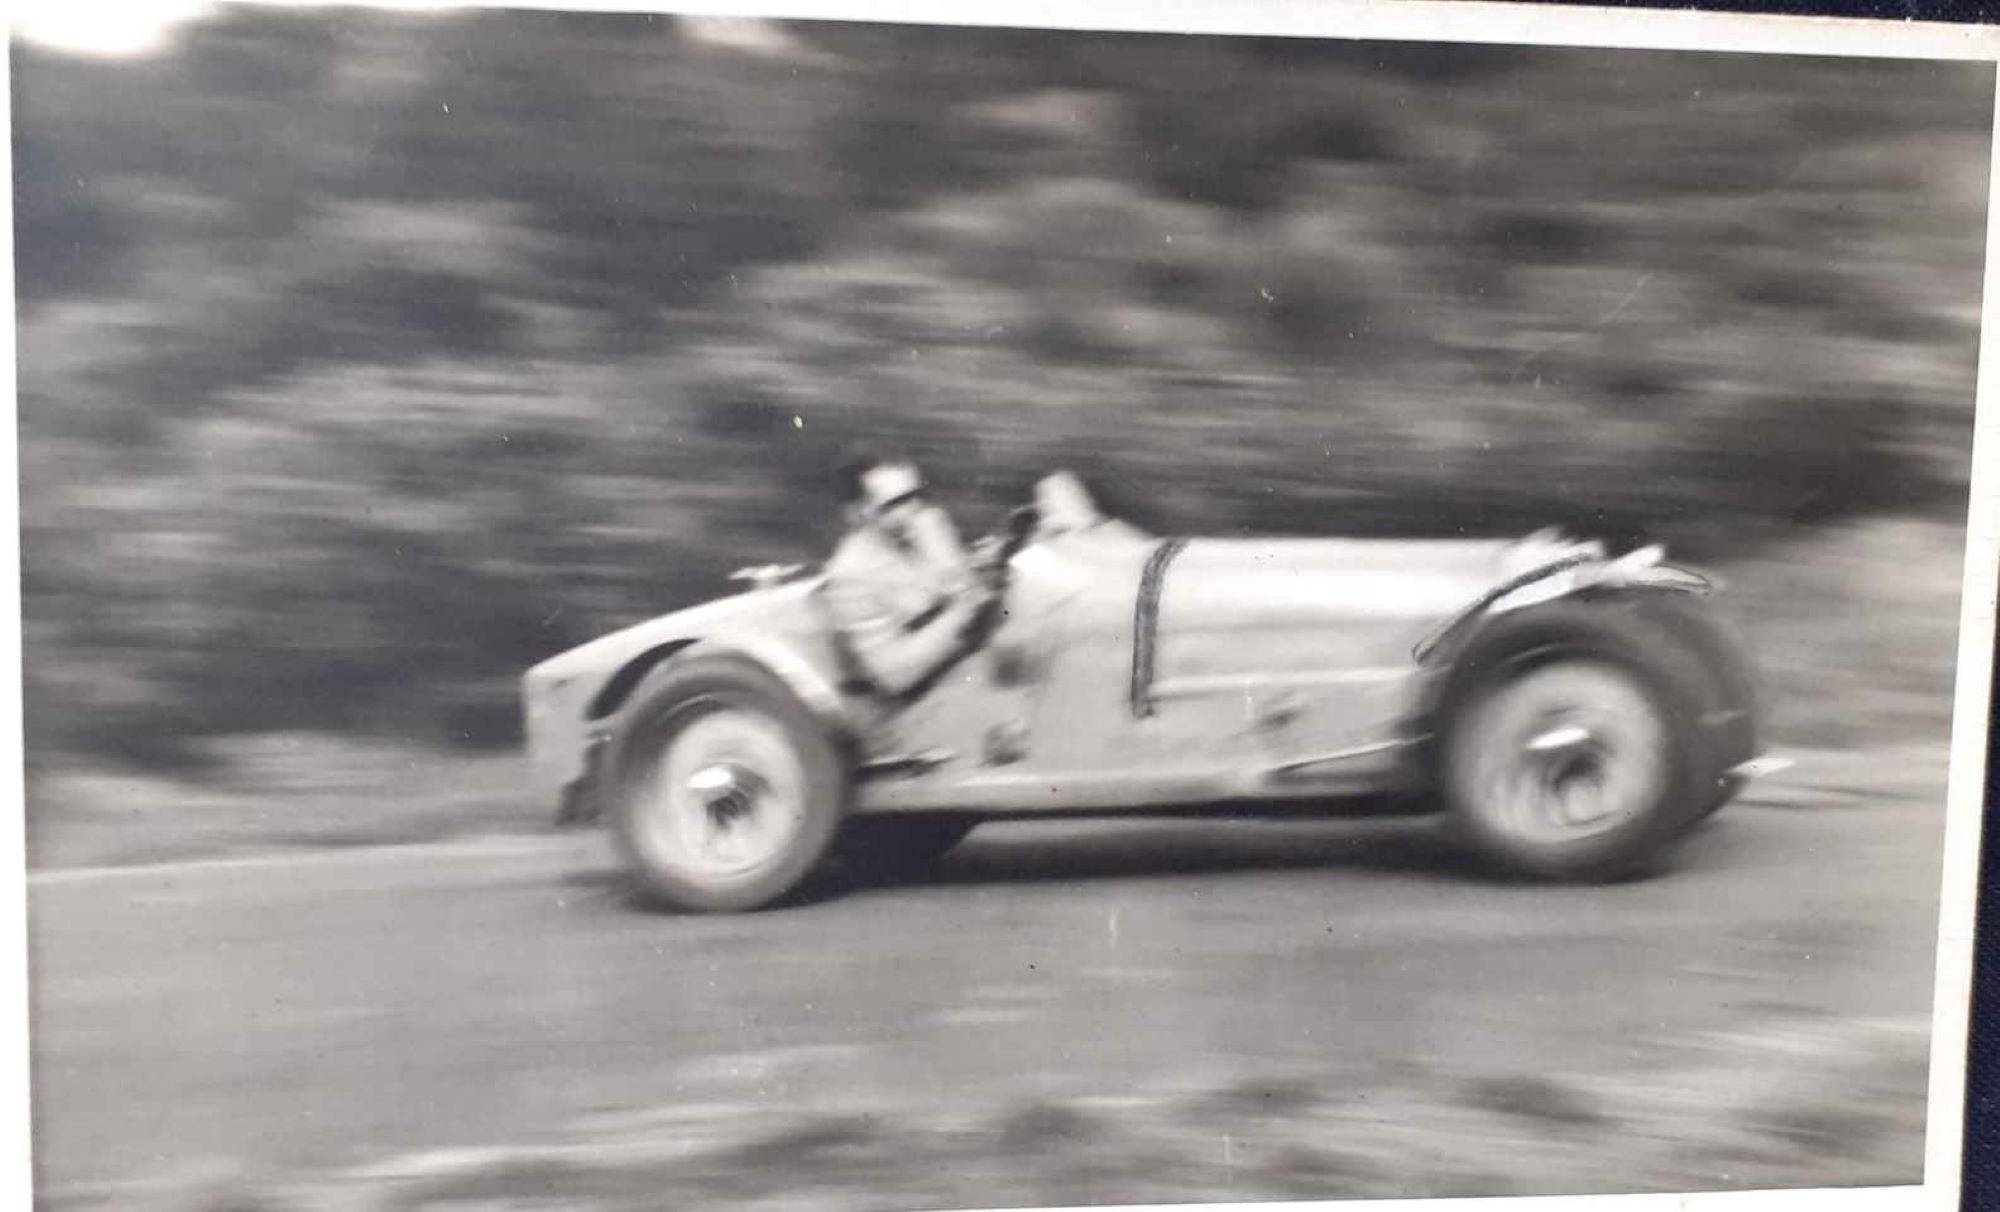 Name:  NSCC 1950 #0116 Bugatti T35 at speed - light colour 1950's - image Graeme Wells arch Anthony Wel.jpg
Views: 194
Size:  158.1 KB